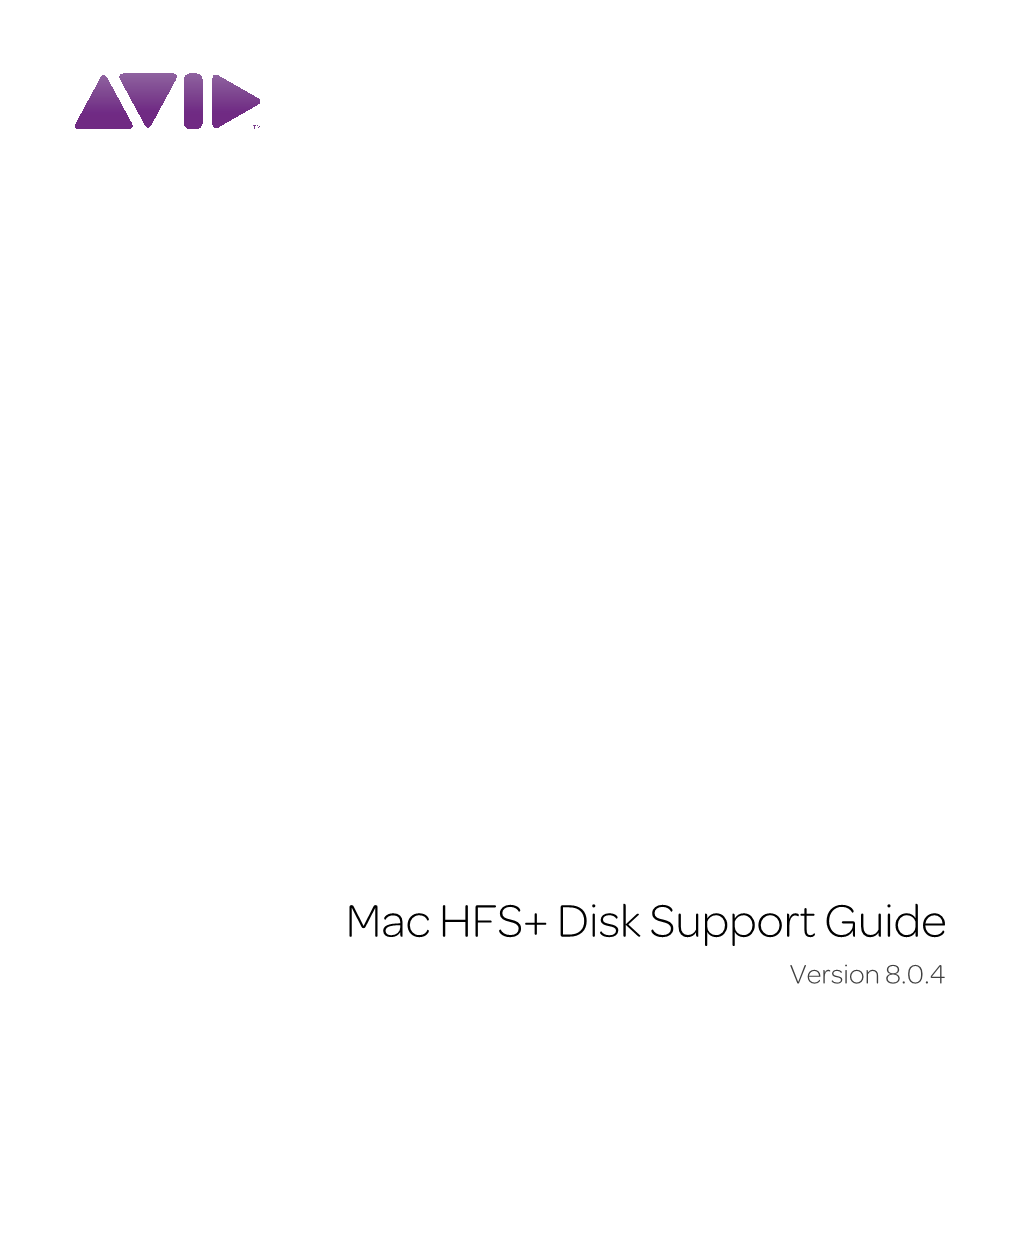 Mac HFS+ Disk Support Guide Version 8.0.4 Legal Notices This Guide Is Copyrighted ©2010 by Avid Technology, Inc., (Hereafter “Avid”), with All Rights Reserved